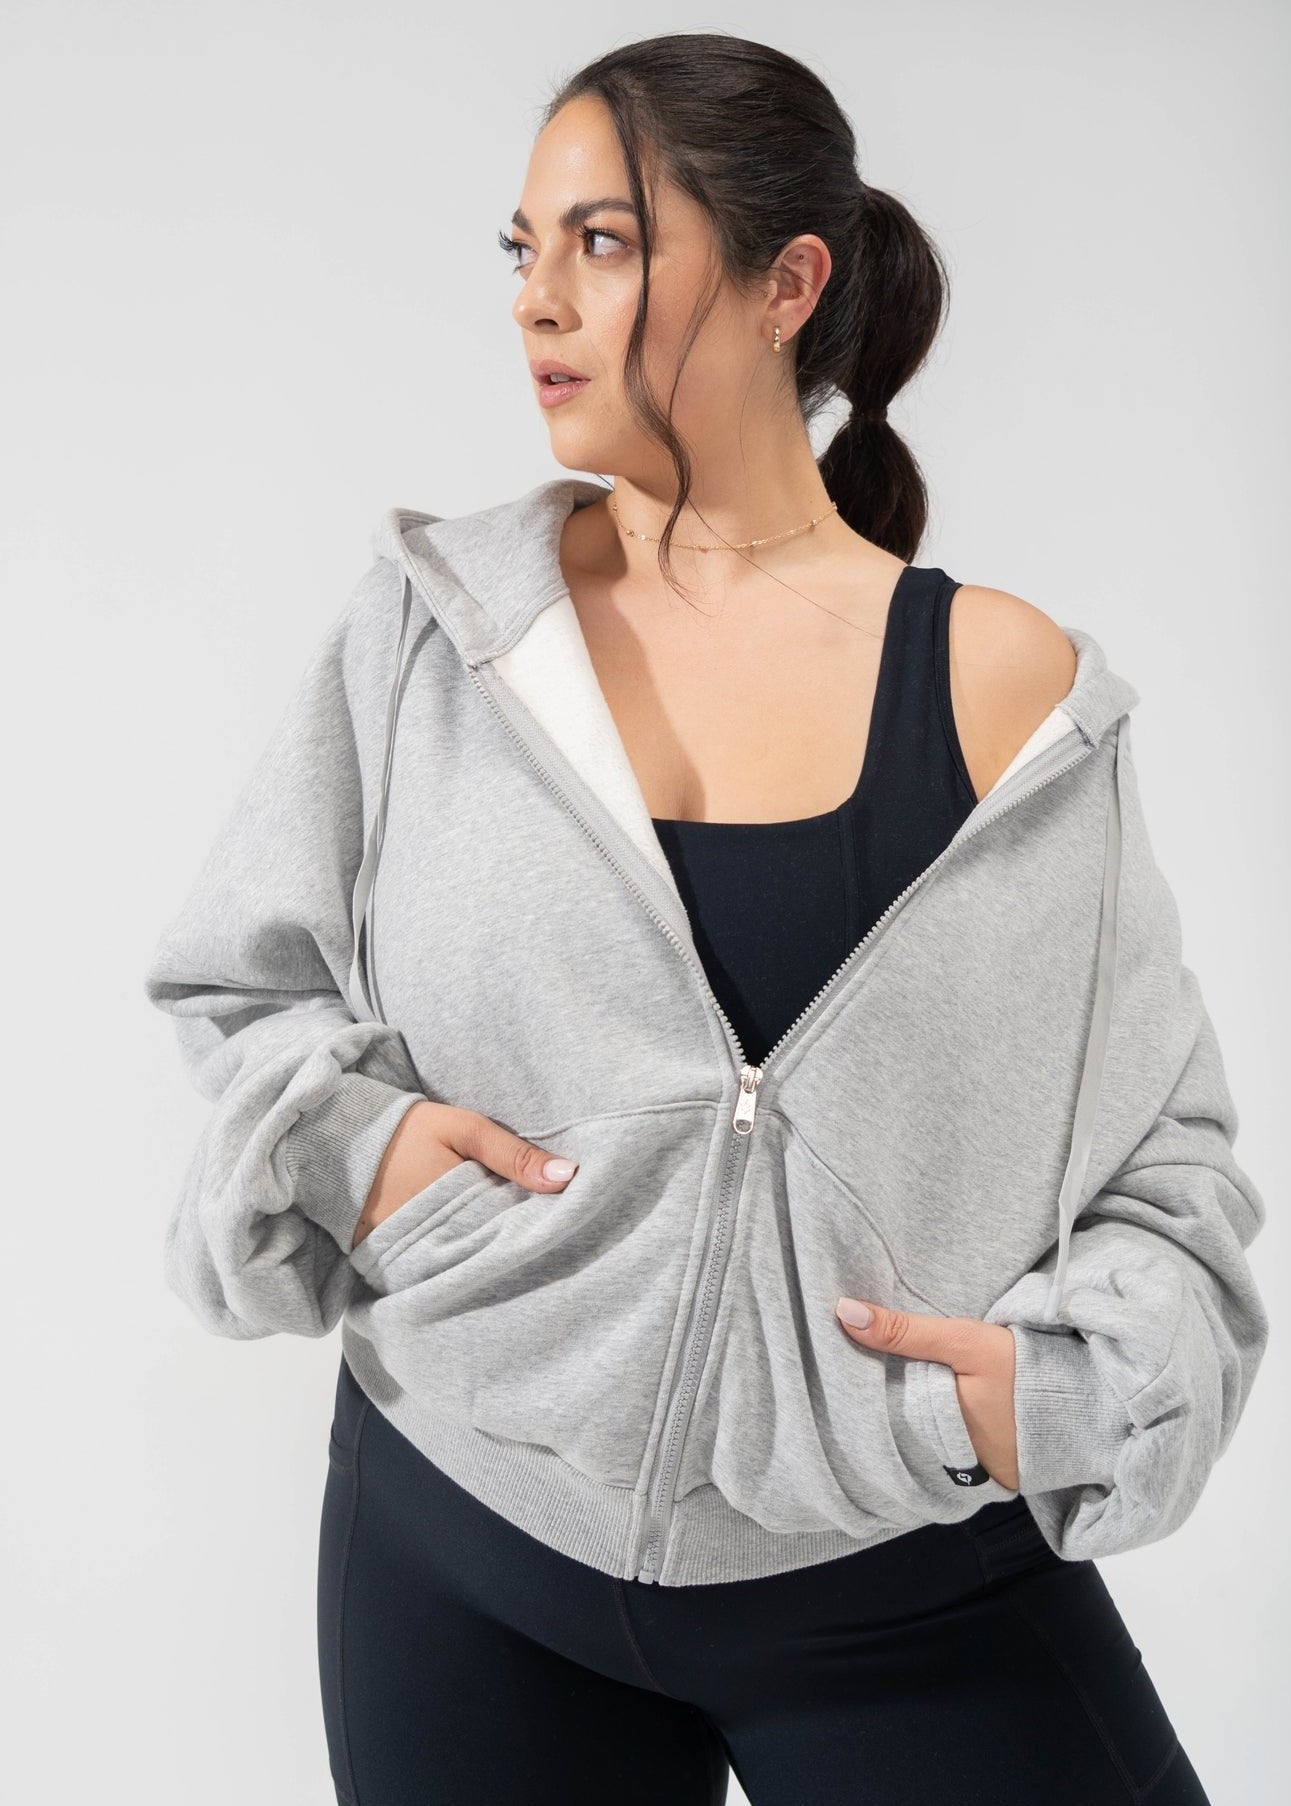 Model is wearing a light grey oversized hoodie with black leggings and a black sports bra